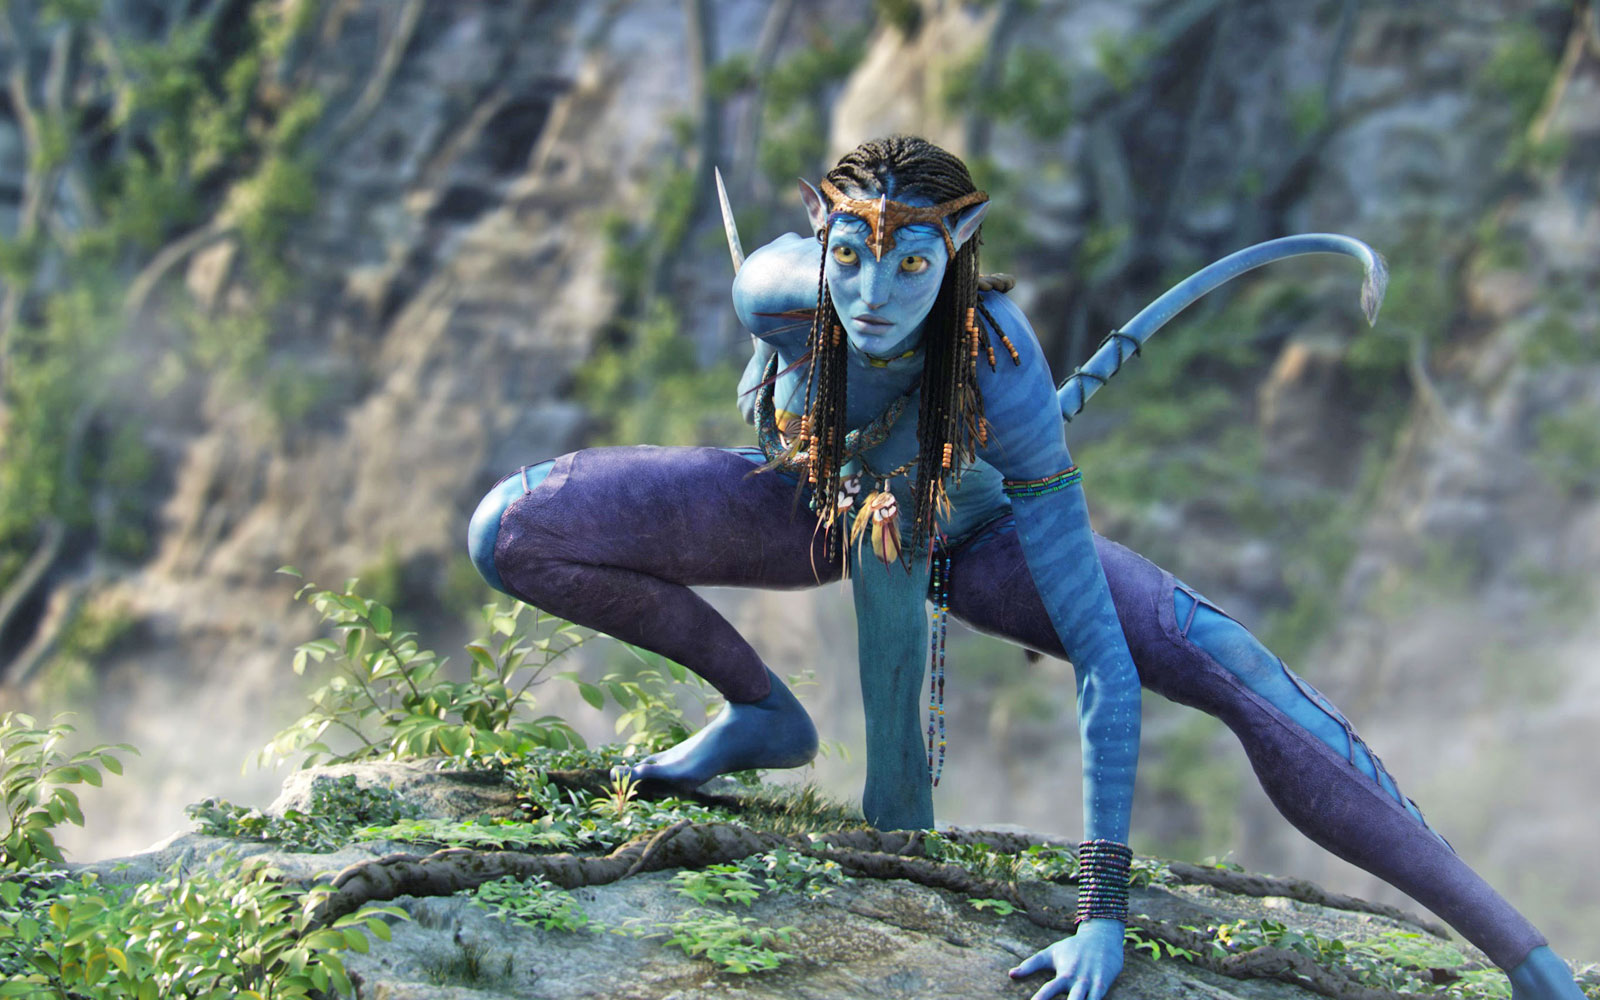 8 BehindtheScenes Images and an Official Synopsis from Avatar 2